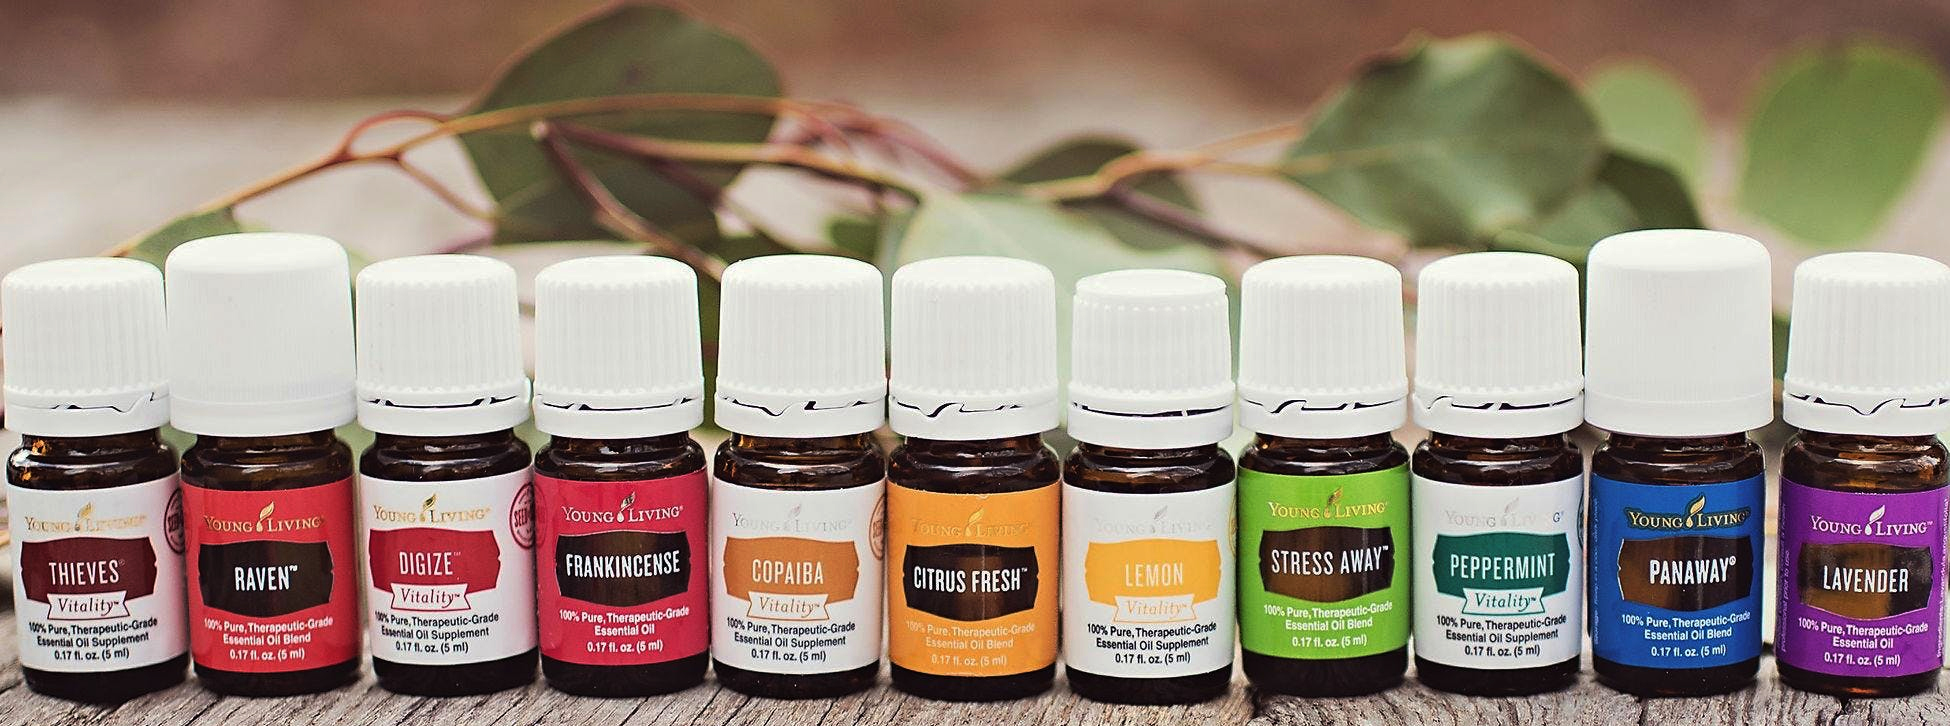 Young Living Essential Oils Troy Ohio